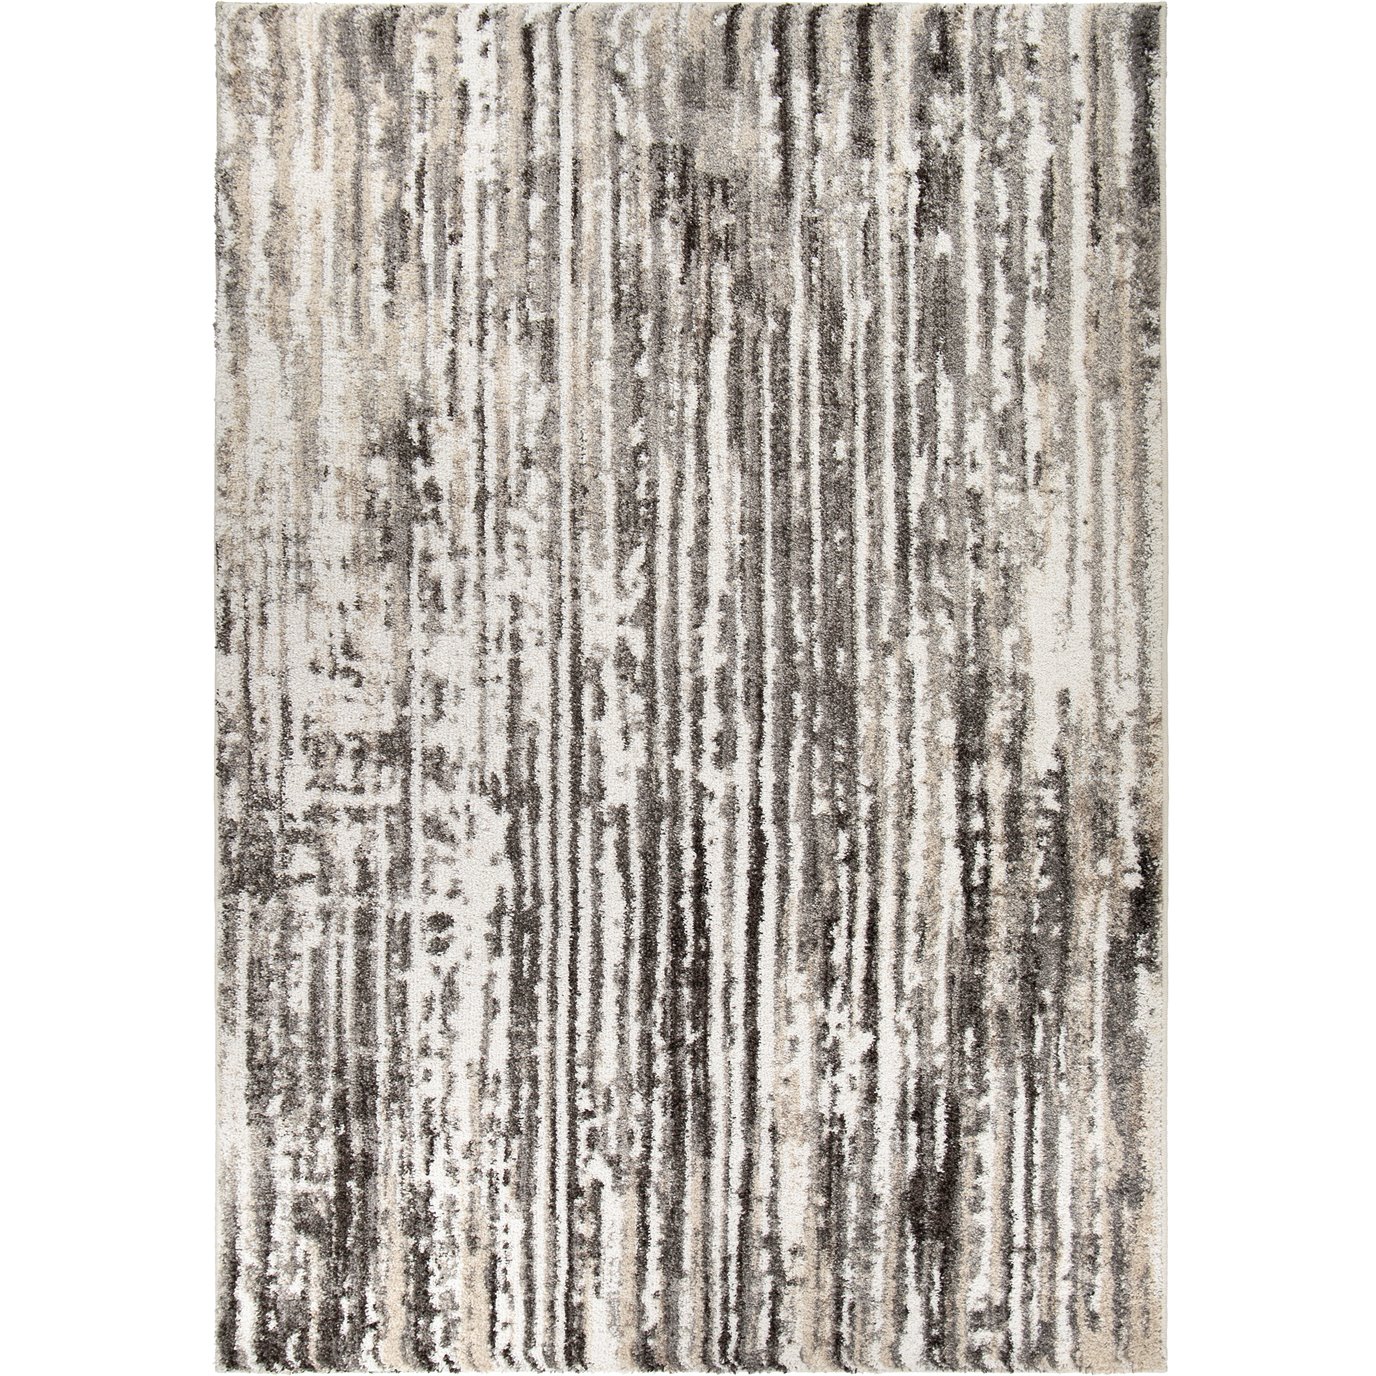 Birchtree - Natural 7'10" X 10'10" Rug